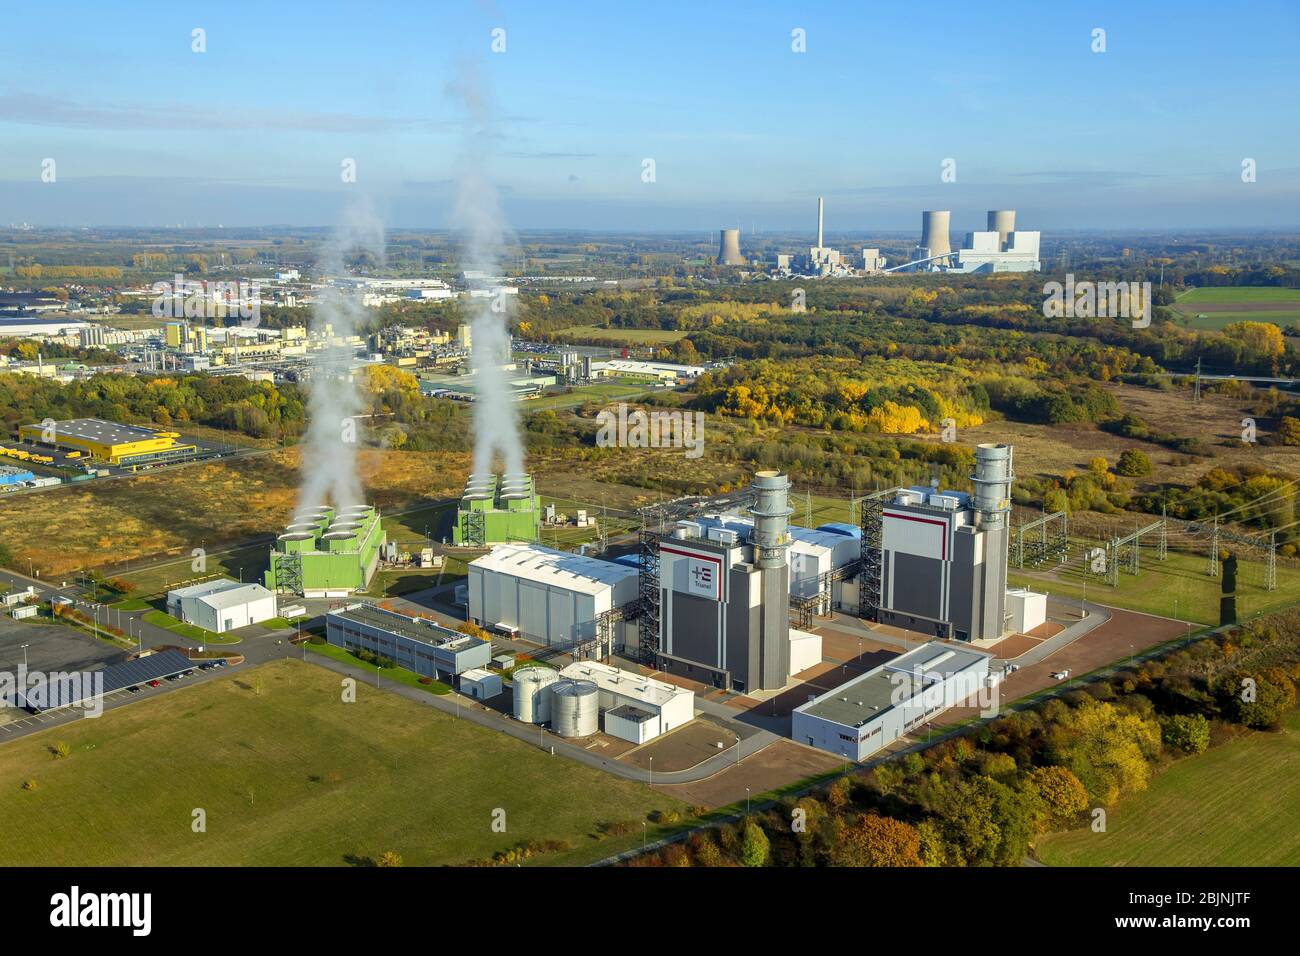 Trianel gas and steam power plant in Hamm-Uentrop in the evening, 31.10.2016, aerial view, Germany, North Rhine-Westphalia, Ruhr Area, Hamm Stock Photo